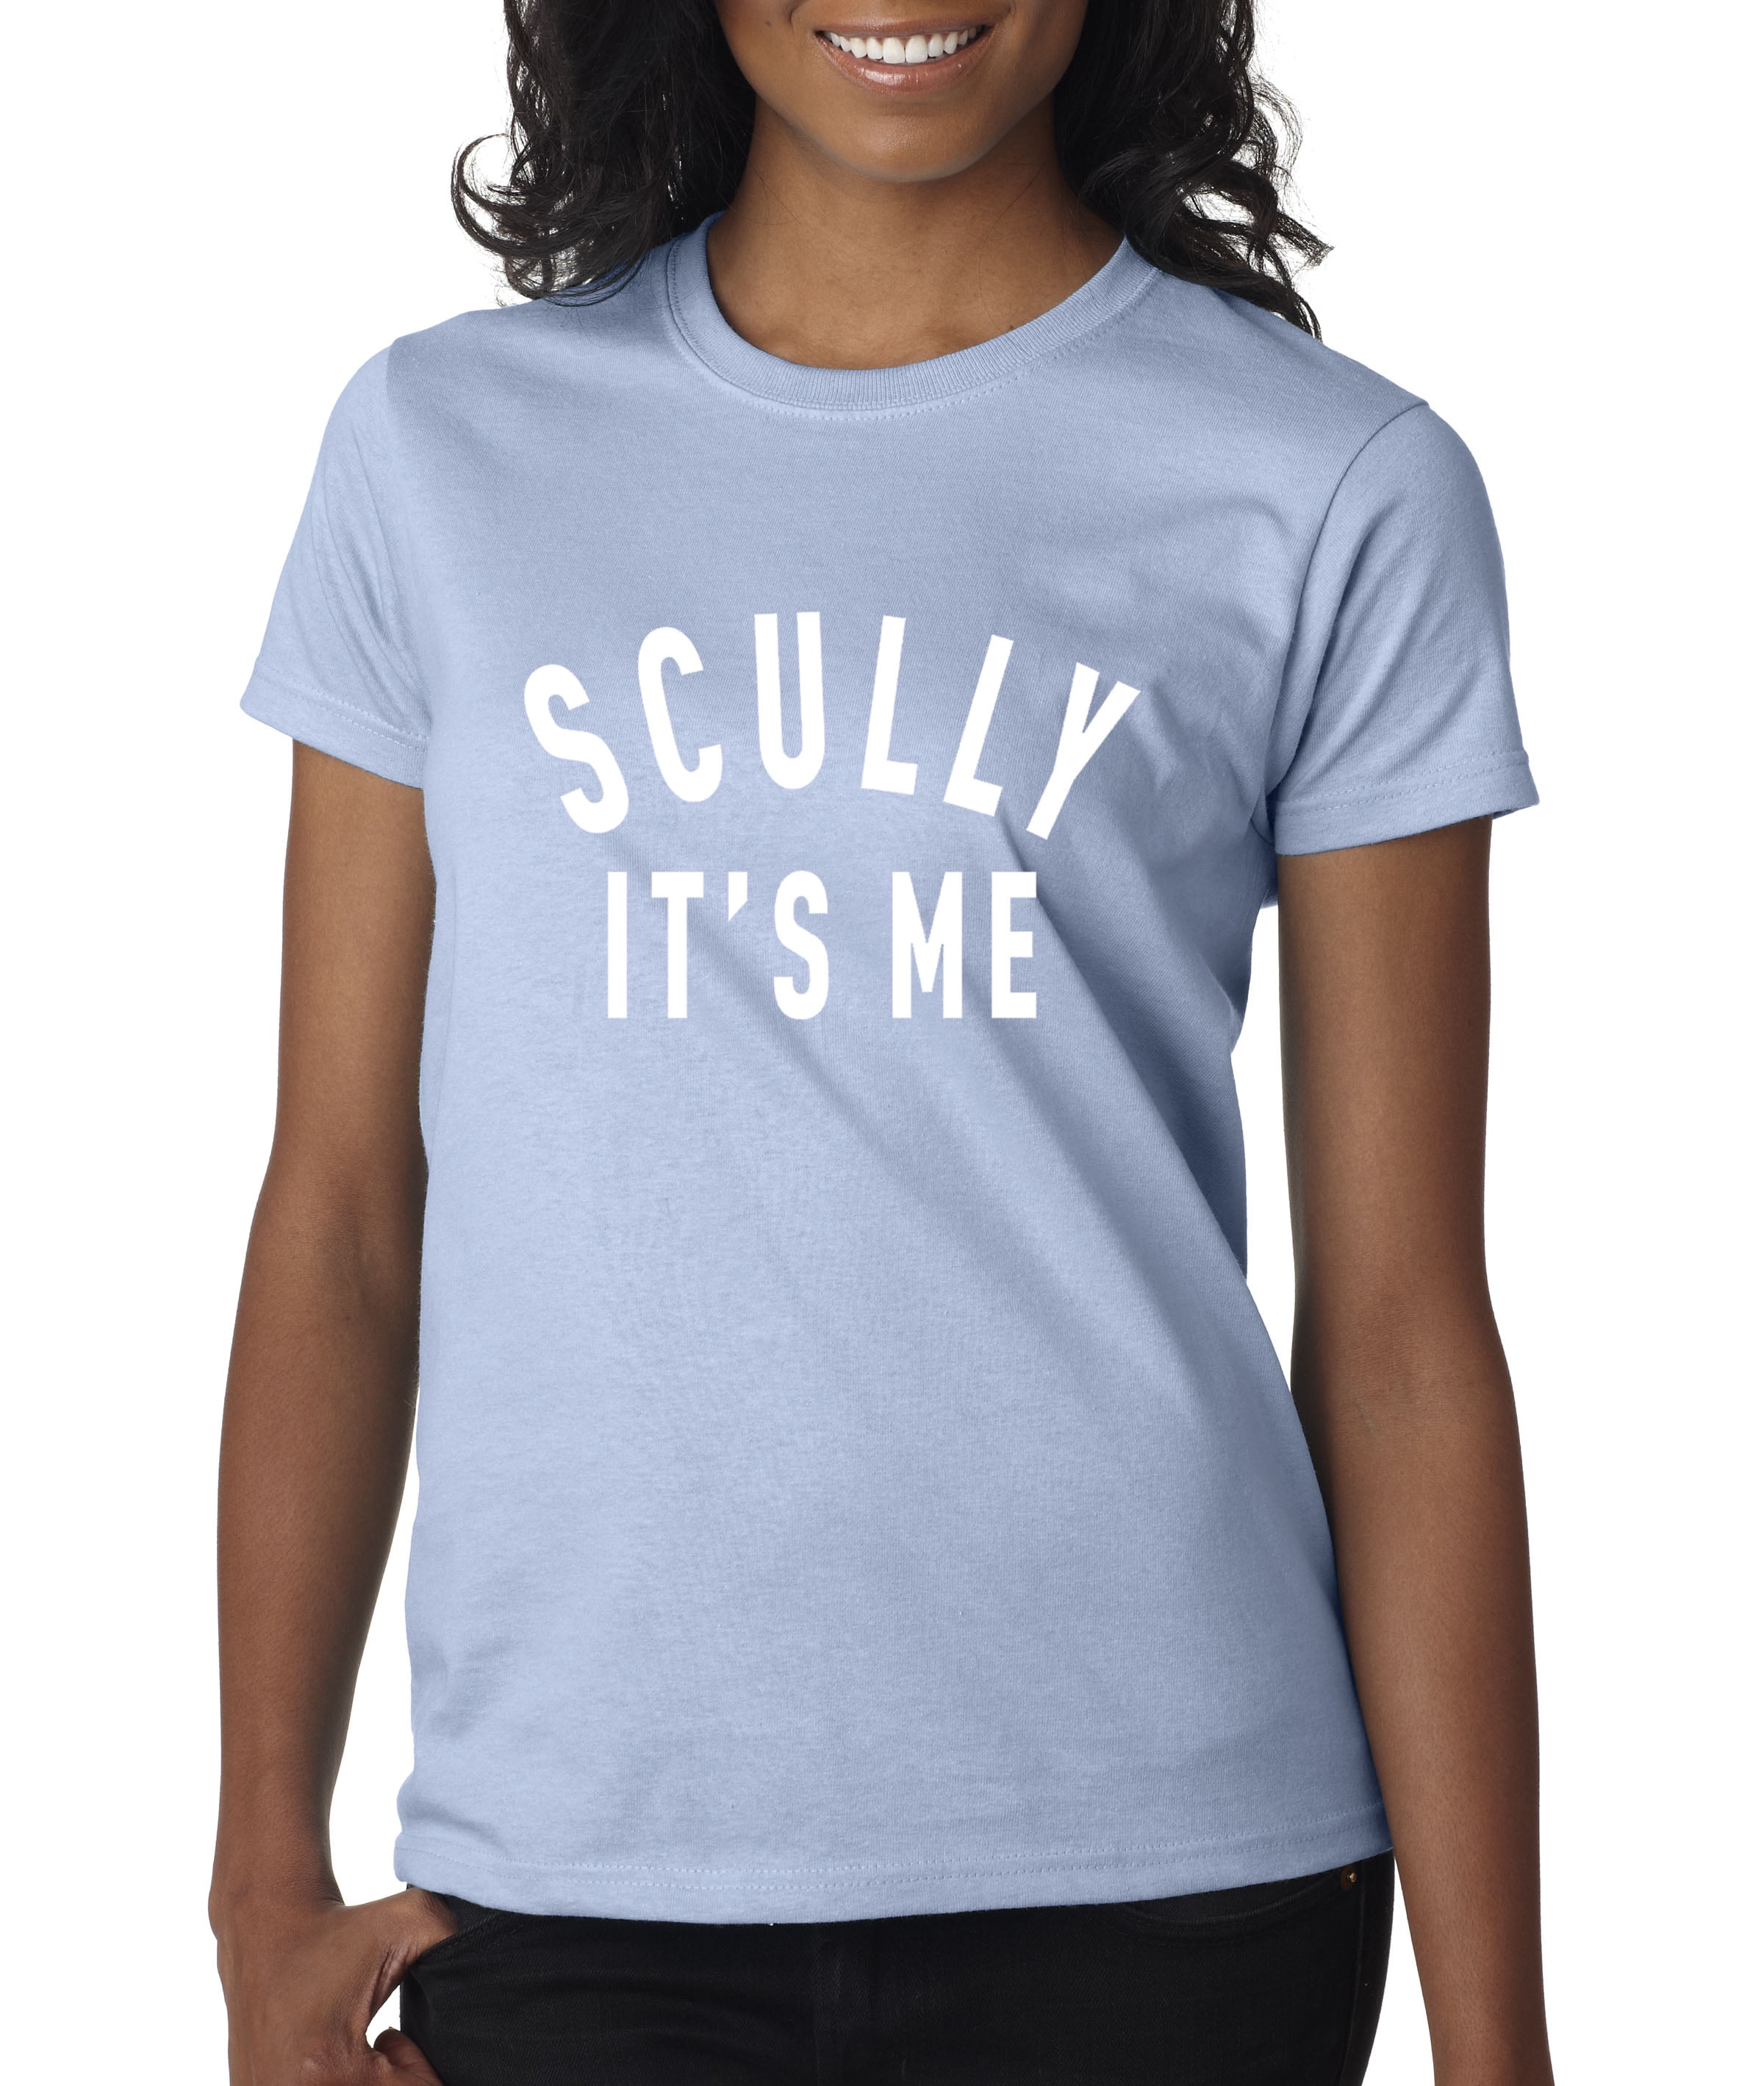 scully shirts near me